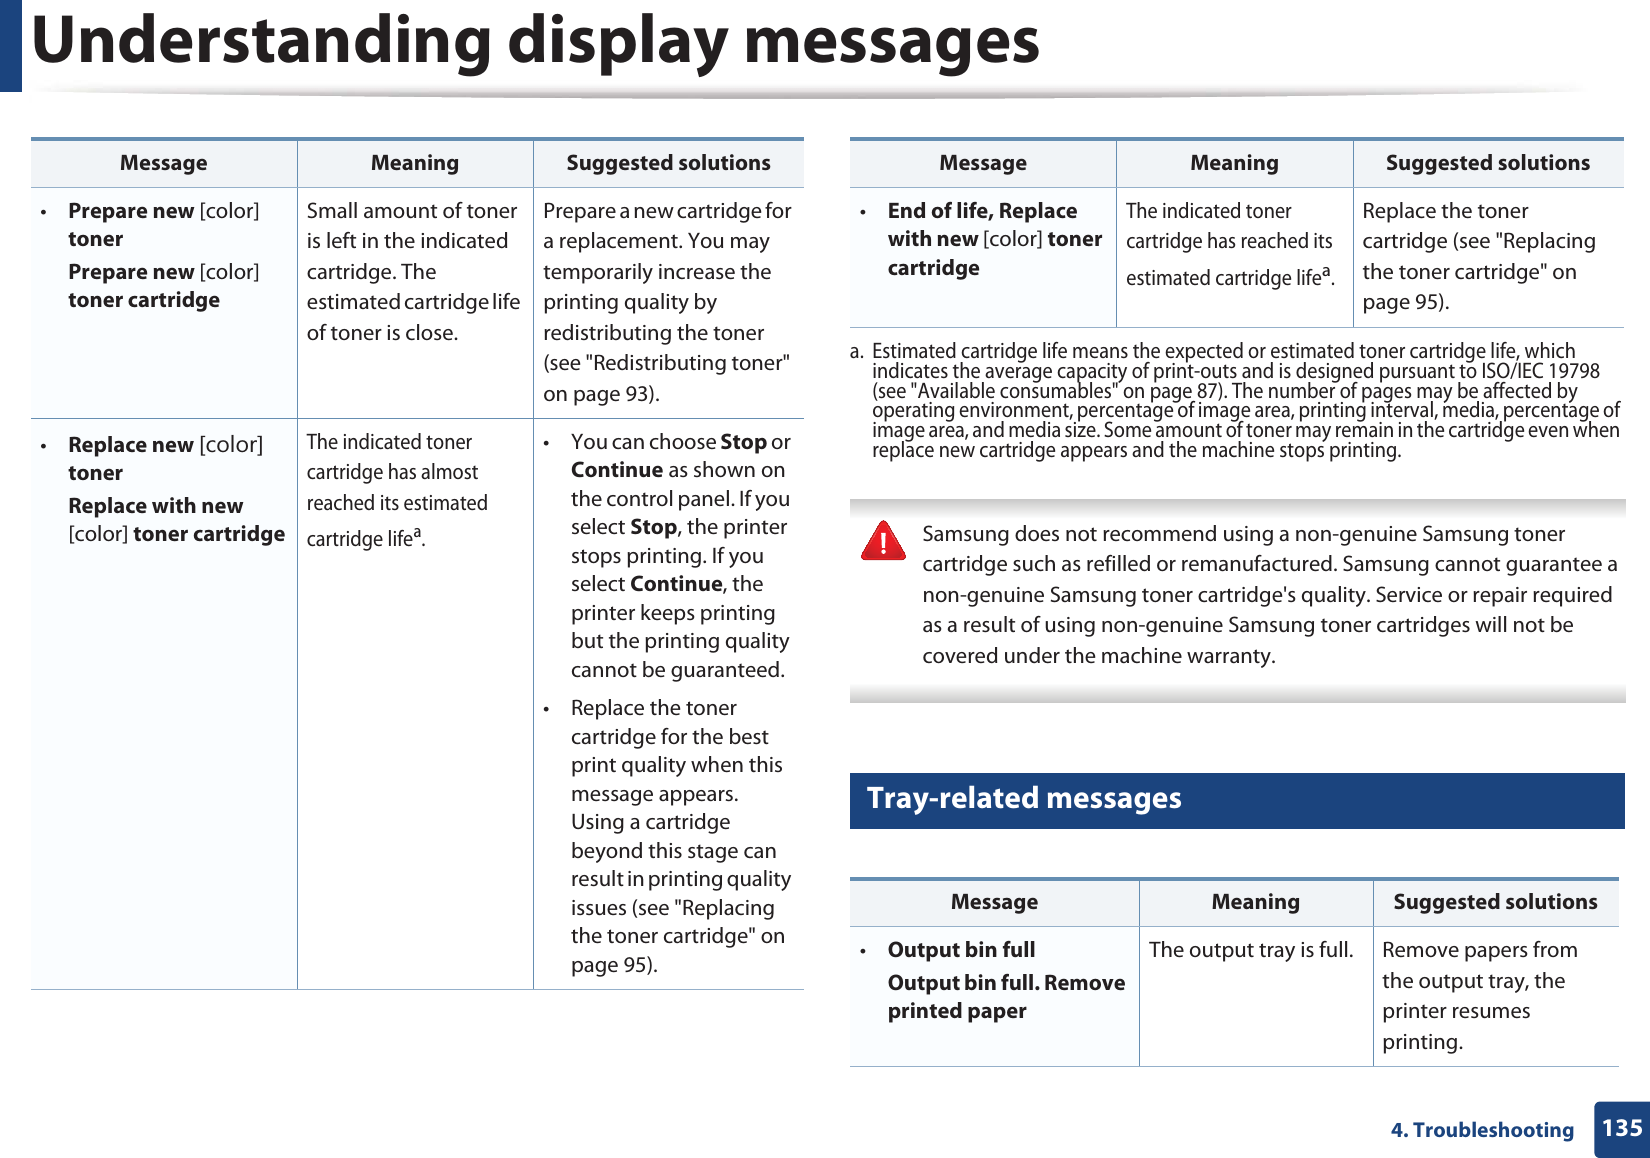 Understanding display messages1354. Troubleshooting Samsung does not recommend using a non-genuine Samsung toner cartridge such as refilled or remanufactured. Samsung cannot guarantee a non-genuine Samsung toner cartridge&apos;s quality. Service or repair required as a result of using non-genuine Samsung toner cartridges will not be covered under the machine warranty. 13 Tray-related messages•Prepare new [color]  tonerPrepare new [color]  toner cartridgeSmall amount of toner is left in the indicated cartridge. The estimated cartridge life of toner is close.Prepare a new cartridge for a replacement. You may temporarily increase the printing quality by redistributing the toner (see &quot;Redistributing toner&quot; on page 93).•Replace new &gt;FRORU@ toner Replace with new  [color] toner cartridgeThe indicated toner cartridge has almost reached its estimated cartridge lifea. • You can choose Stop or Continue as shown on the control panel. If you select Stop, the printer stops printing. If you select Continue, the printer keeps printing but the printing quality cannot be guaranteed.• Replace the toner cartridge for the best print quality when this message appears. Using a cartridge beyond this stage can result in printing quality issues (see &quot;Replacing the toner cartridge&quot; on page 95).Message Meaning Suggested solutions•End of life, Replace with new [color] toner cartridgeThe indicated toner cartridge has reached its estimated cartridge lifea.Replace the toner cartridge (see &quot;Replacing the toner cartridge&quot; on page 95).a. Estimated cartridge life means the expected or estimated toner cartridge life, which indicates the average capacity of print-outs and is designed pursuant to ISO/IEC 19798 (see &quot;Available consumables&quot; on page 87). The number of pages may be affected by operating environment, percentage of image area, printing interval, media, percentage of image area, and media size. Some amount of toner may remain in the cartridge even when replace new cartridge appears and the machine stops printing.Message Meaning Suggested solutions•Output bin fullOutput bin full. Remove printed paperThe output tray is full.  Remove papers from the output tray, the printer resumes printing. Message Meaning Suggested solutions